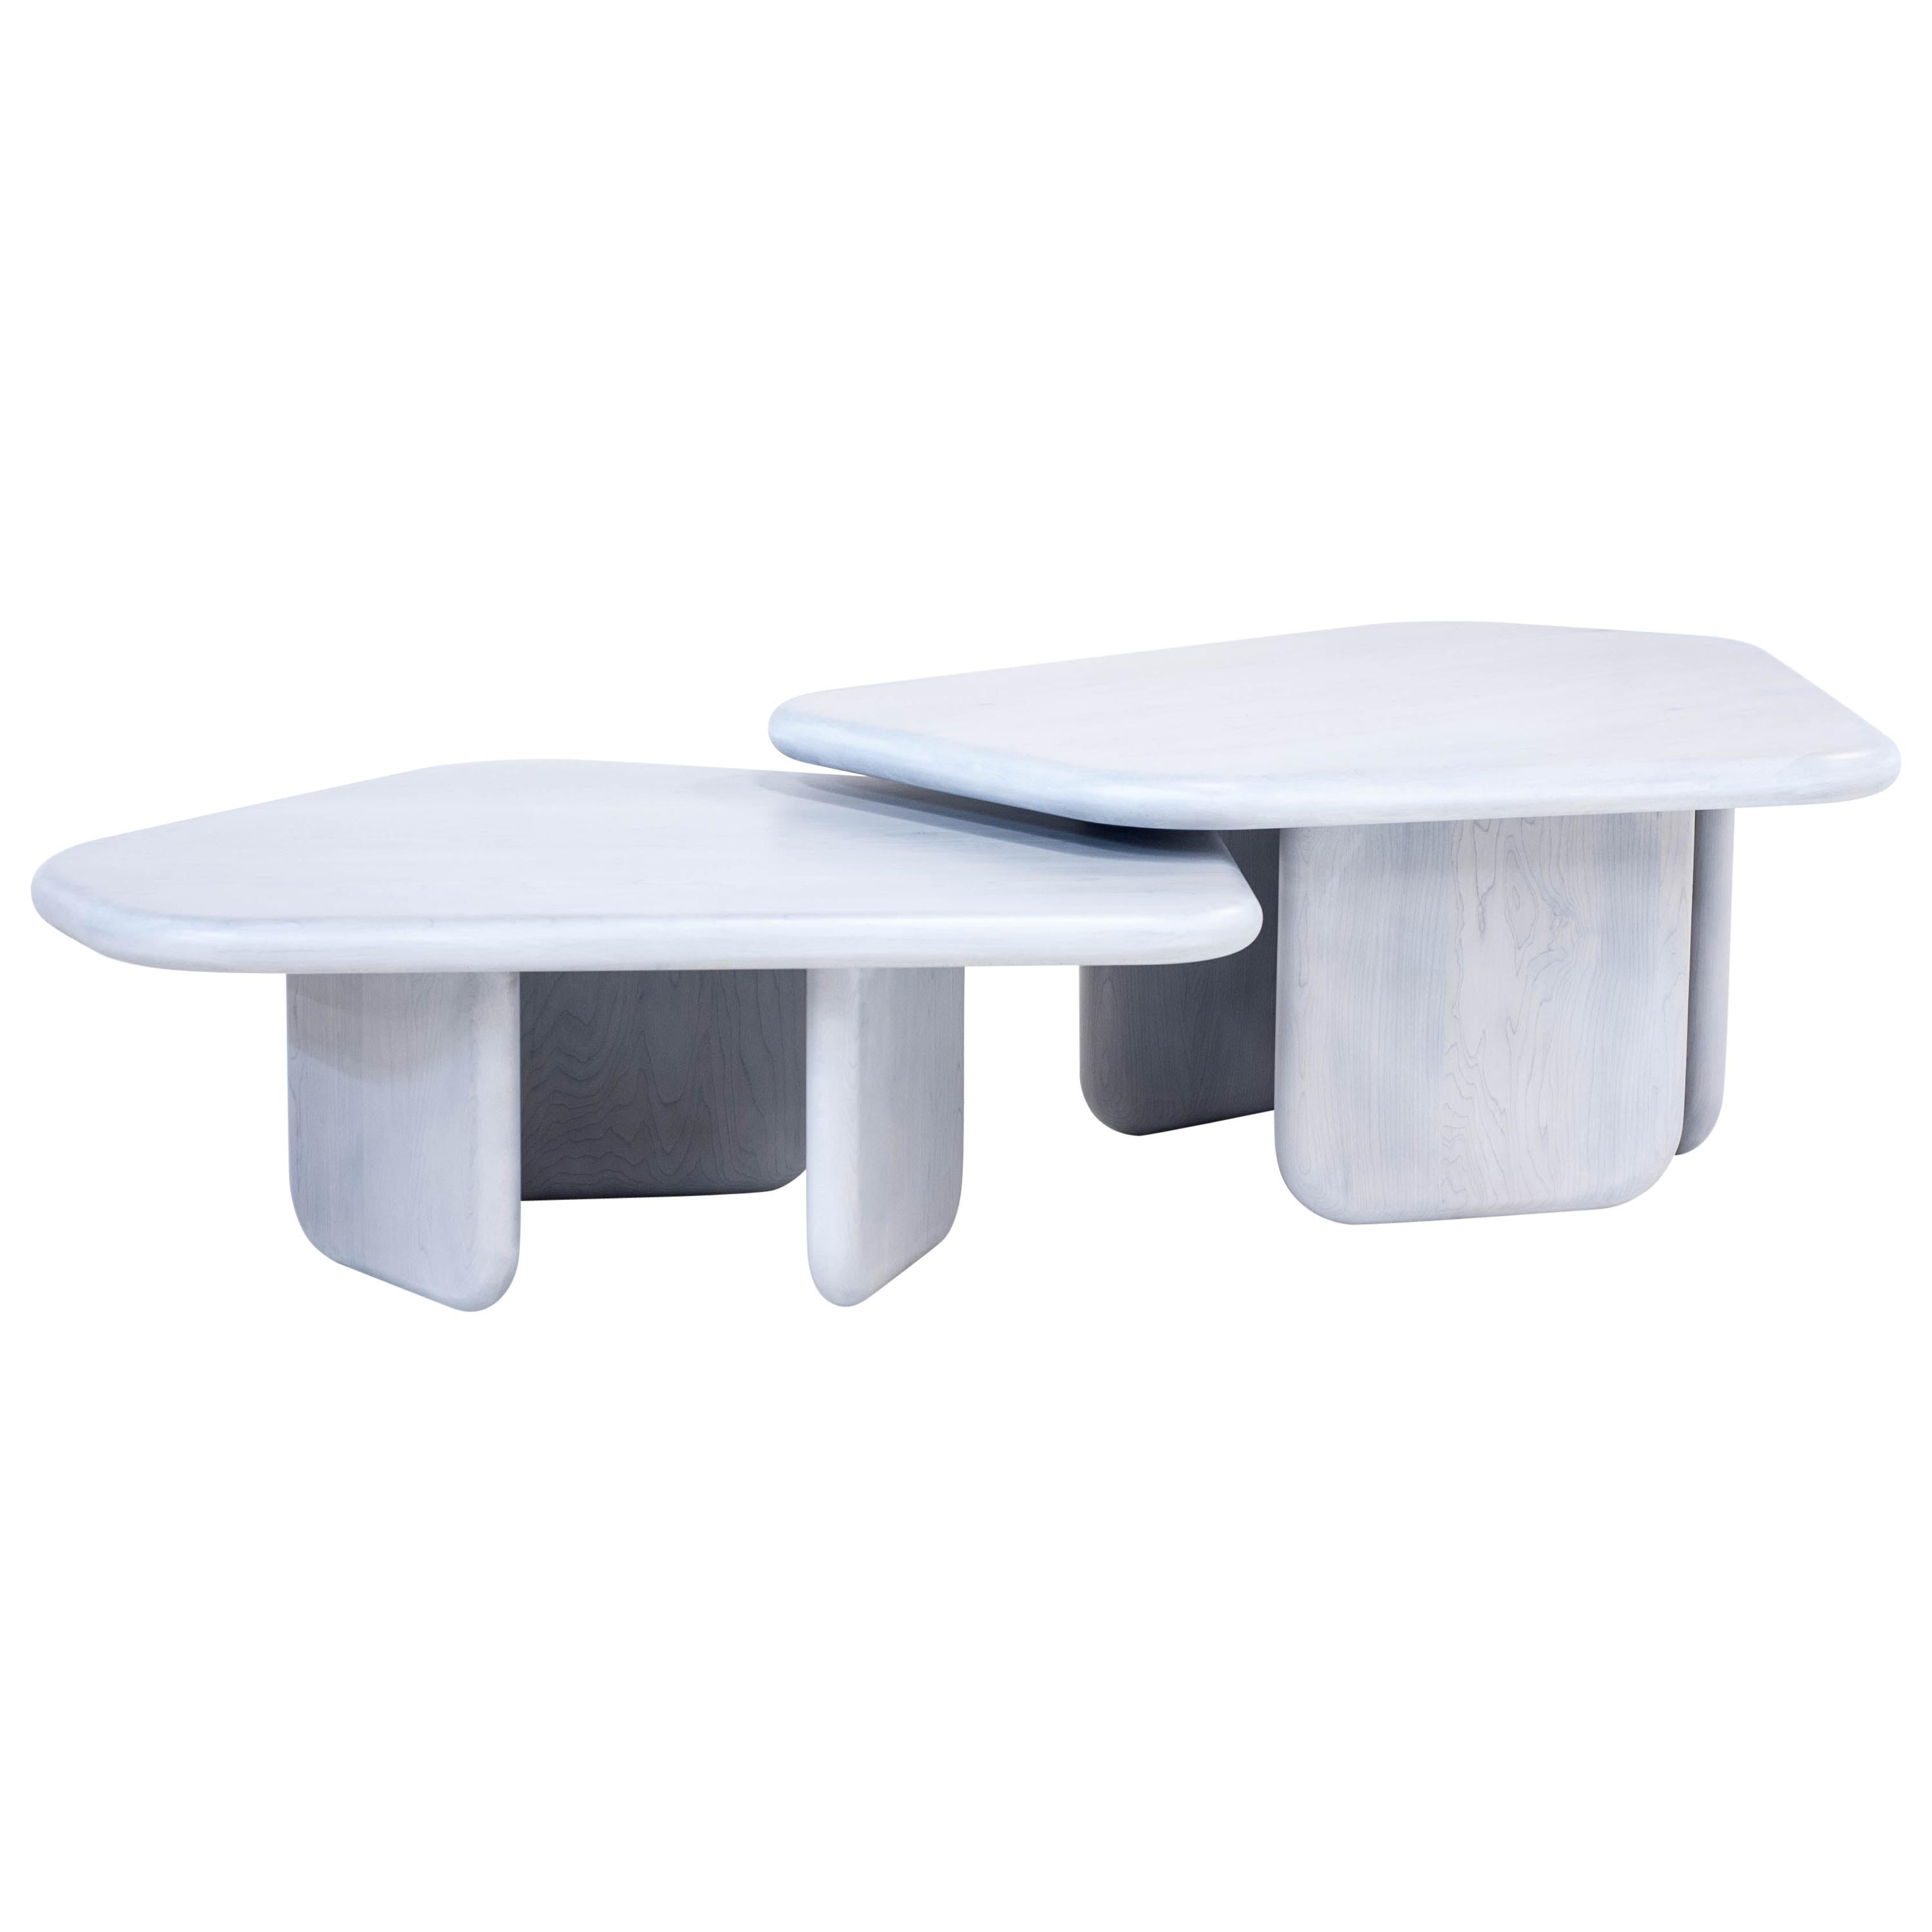 Dolmen Tables 'Nesting Pair' in Stonewashed Maple App. Configuration